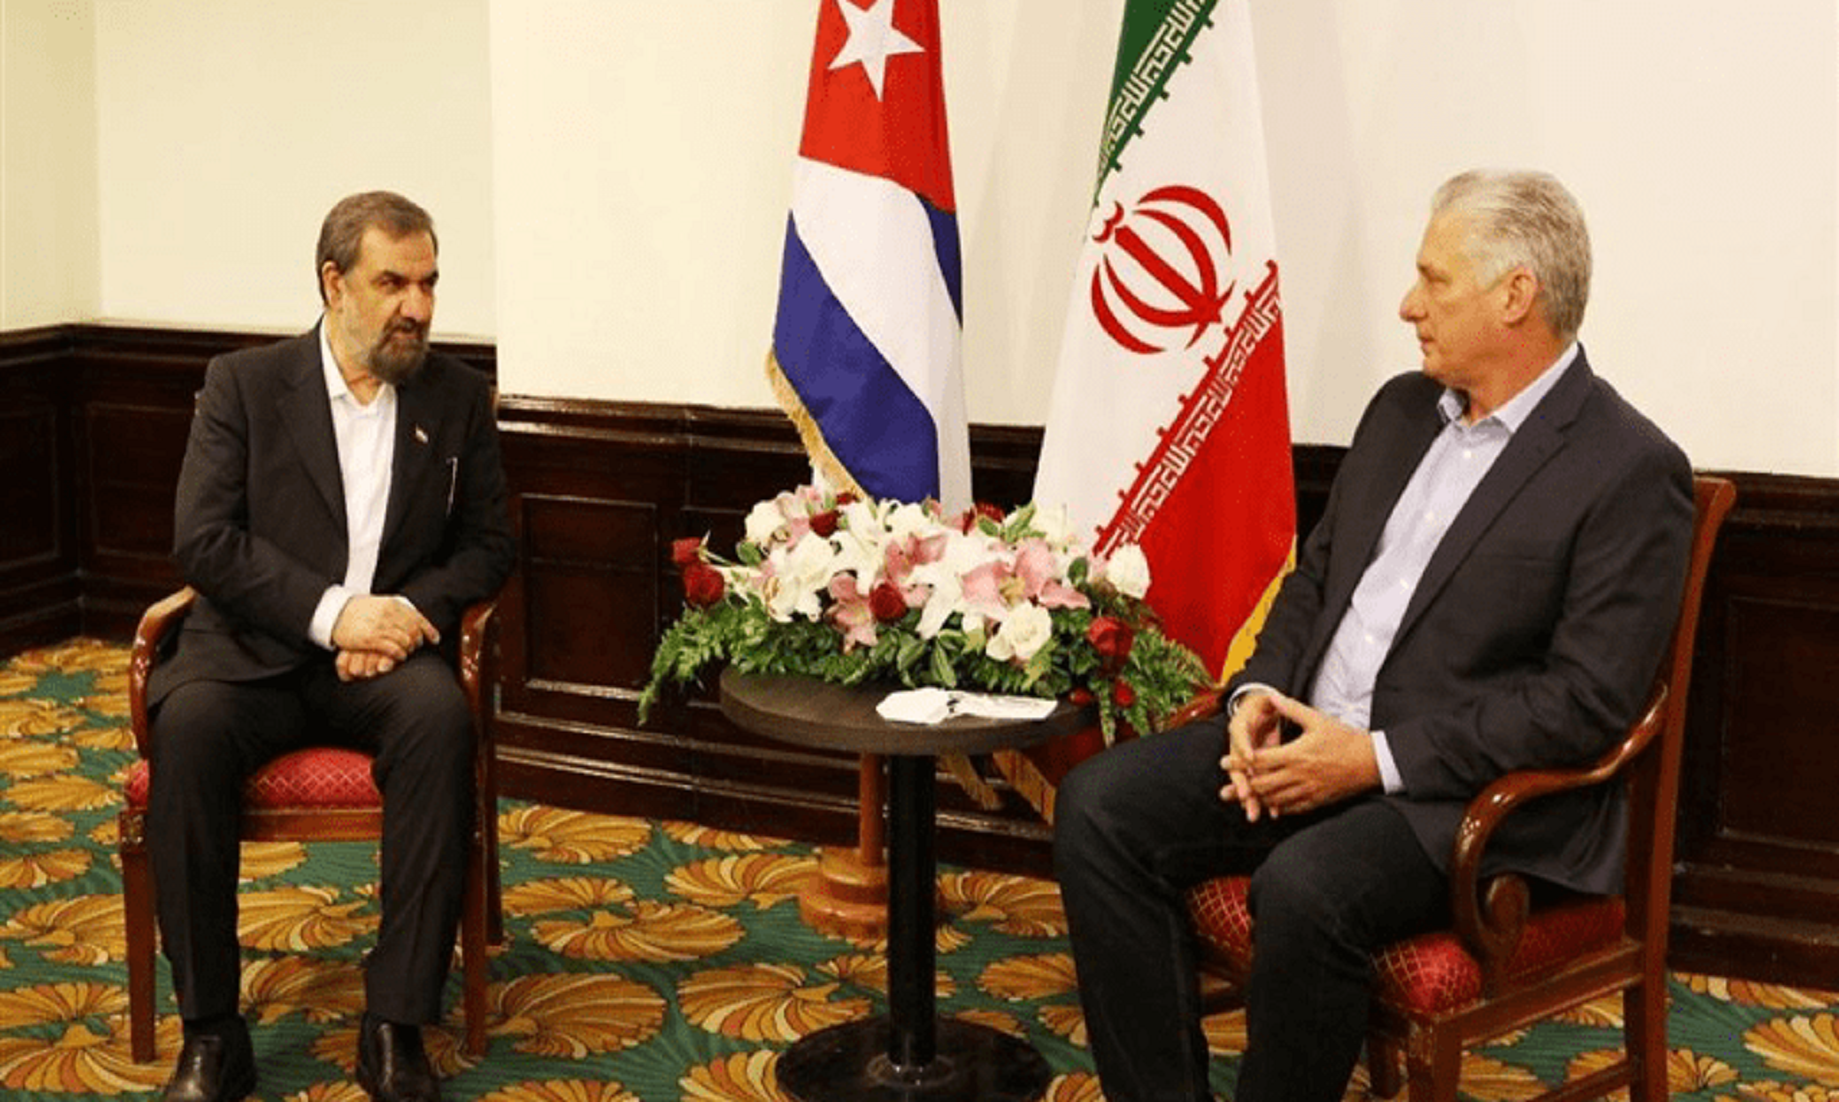 Iran Calls For Closer Cooperation With Cuba To Counter U.S. Sanctions